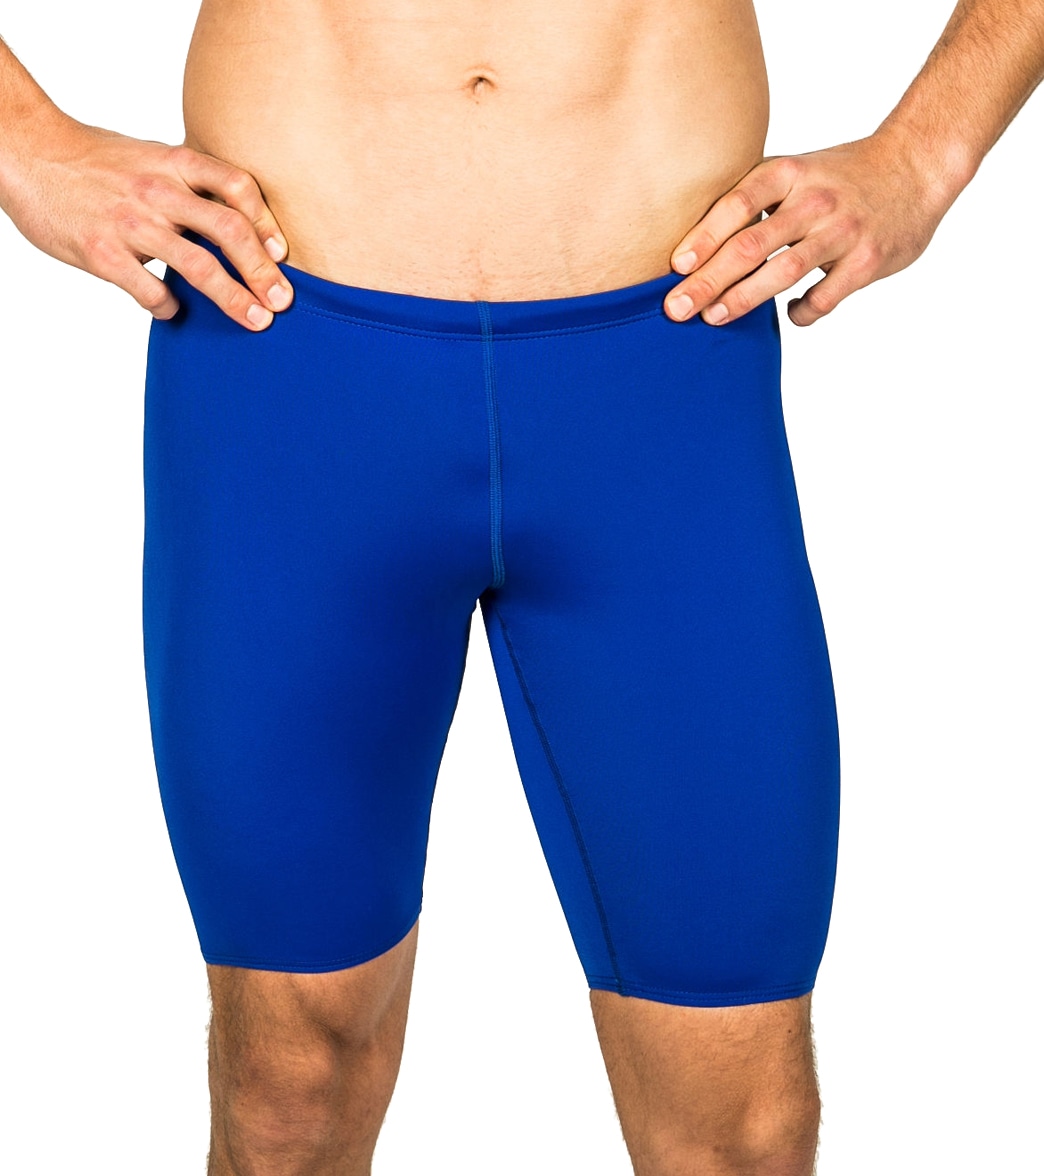 Finis Men's Solid Jammer Swimsuit - Blueberry 28 - Swimoutlet.com